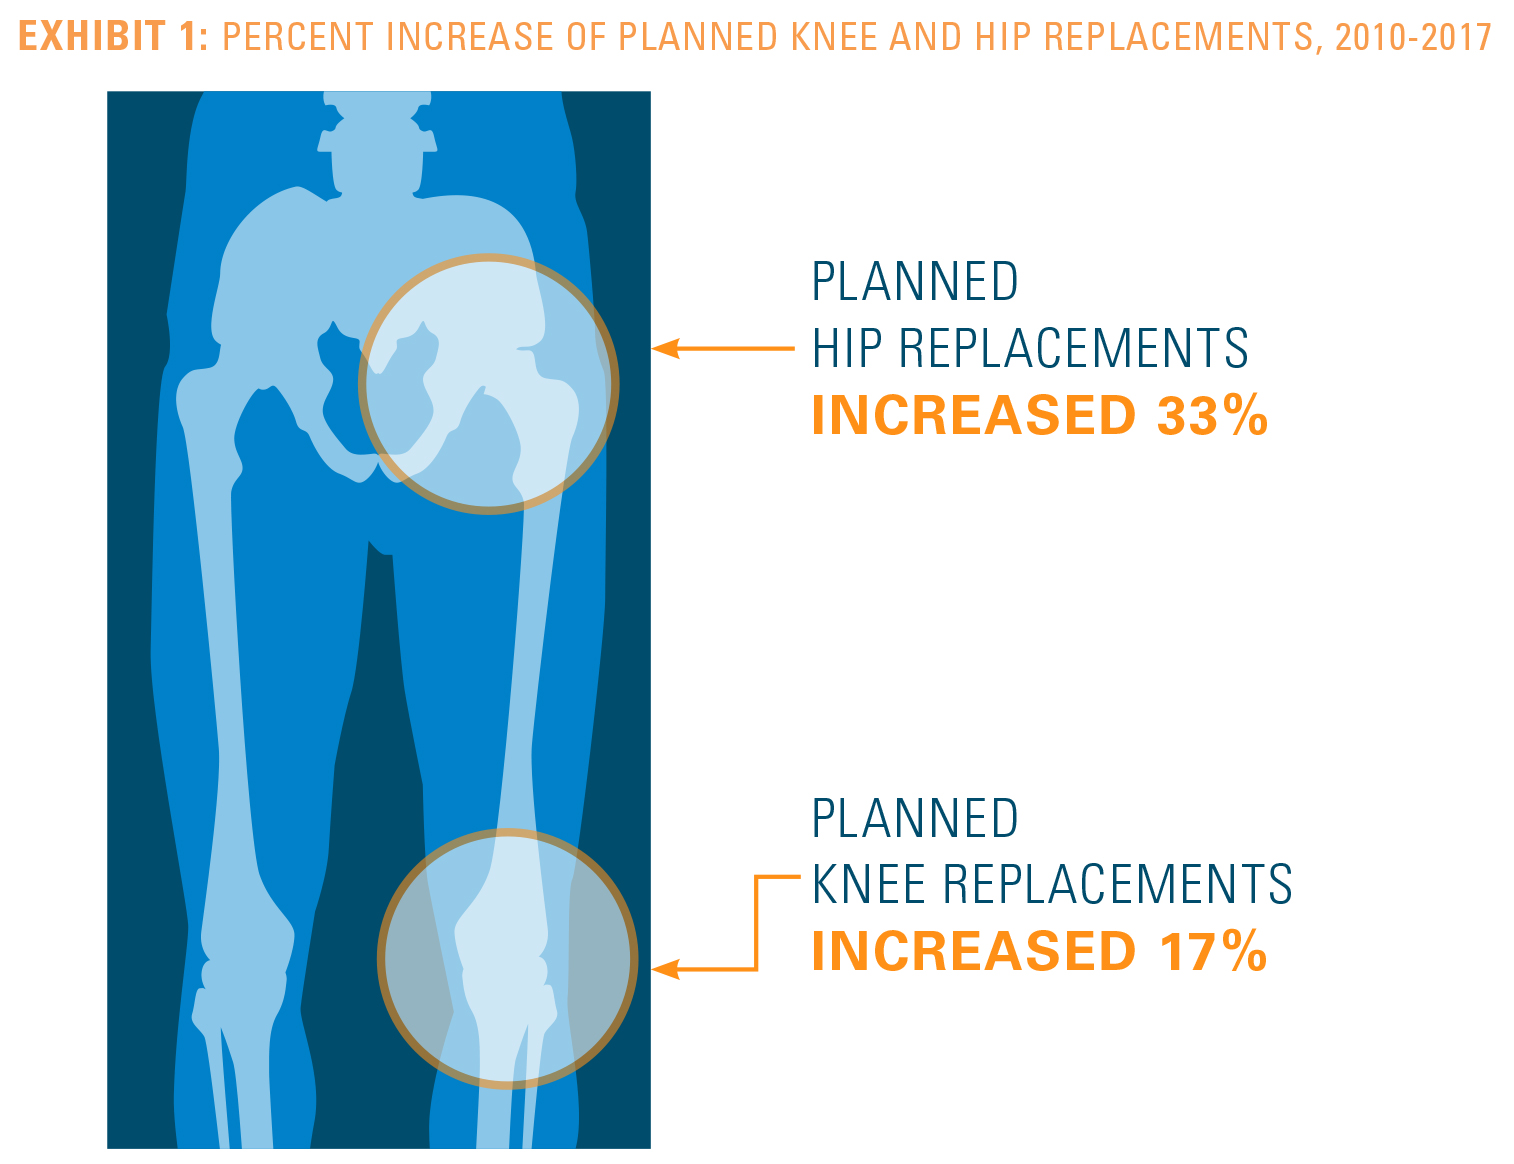 EXHIBIT 1: PERCENT INCREASE OF PLANNED KNEE AND HIP REPLACEMENTS, 2010-2017